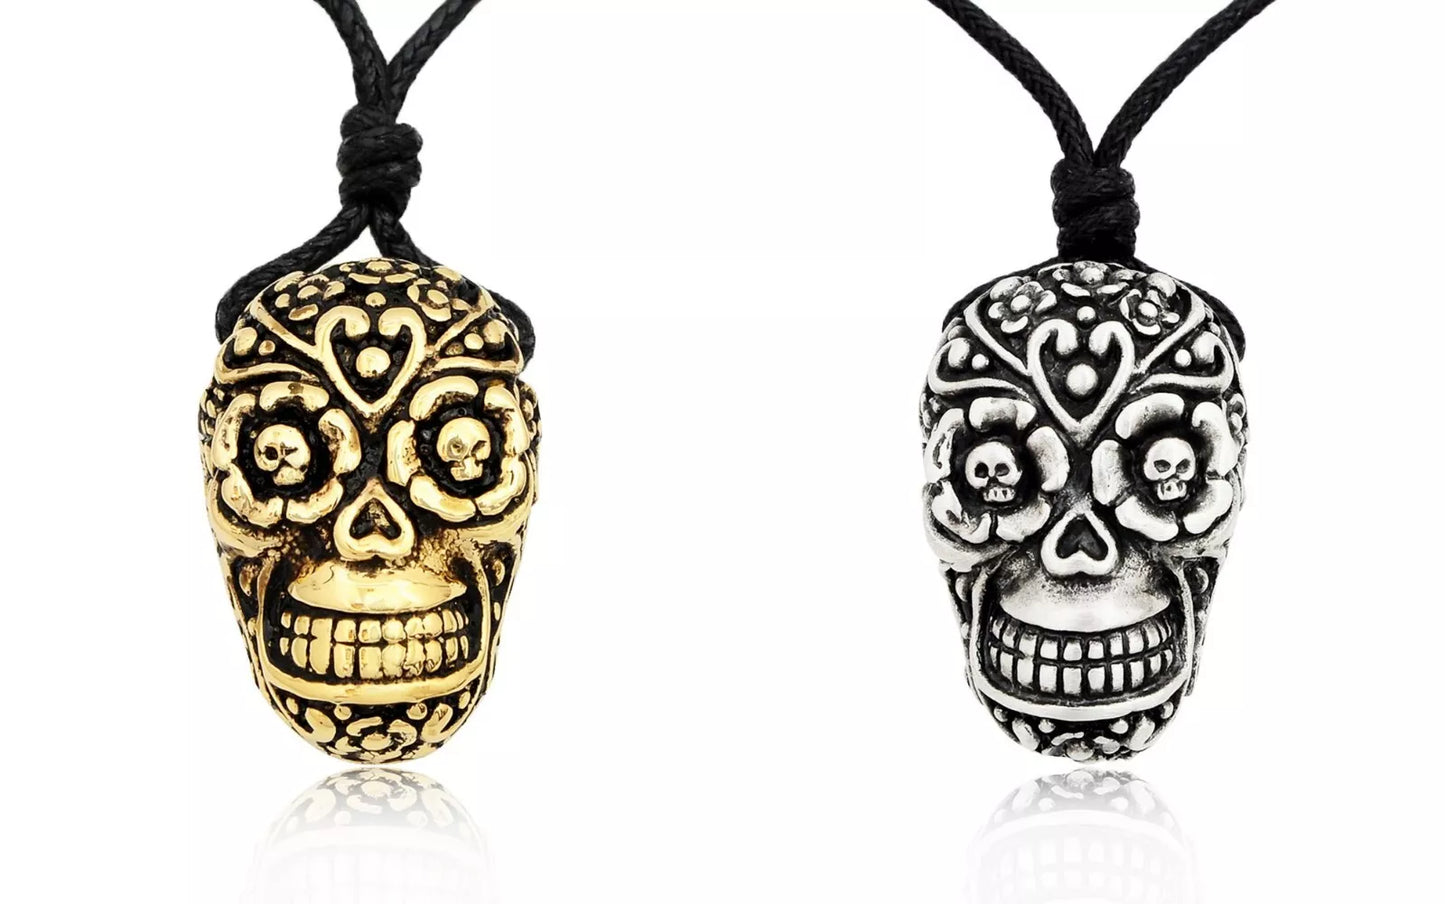 Sugar Skull Handmade Gold Brass Silver Pewter Necklace Pendant Jewelry